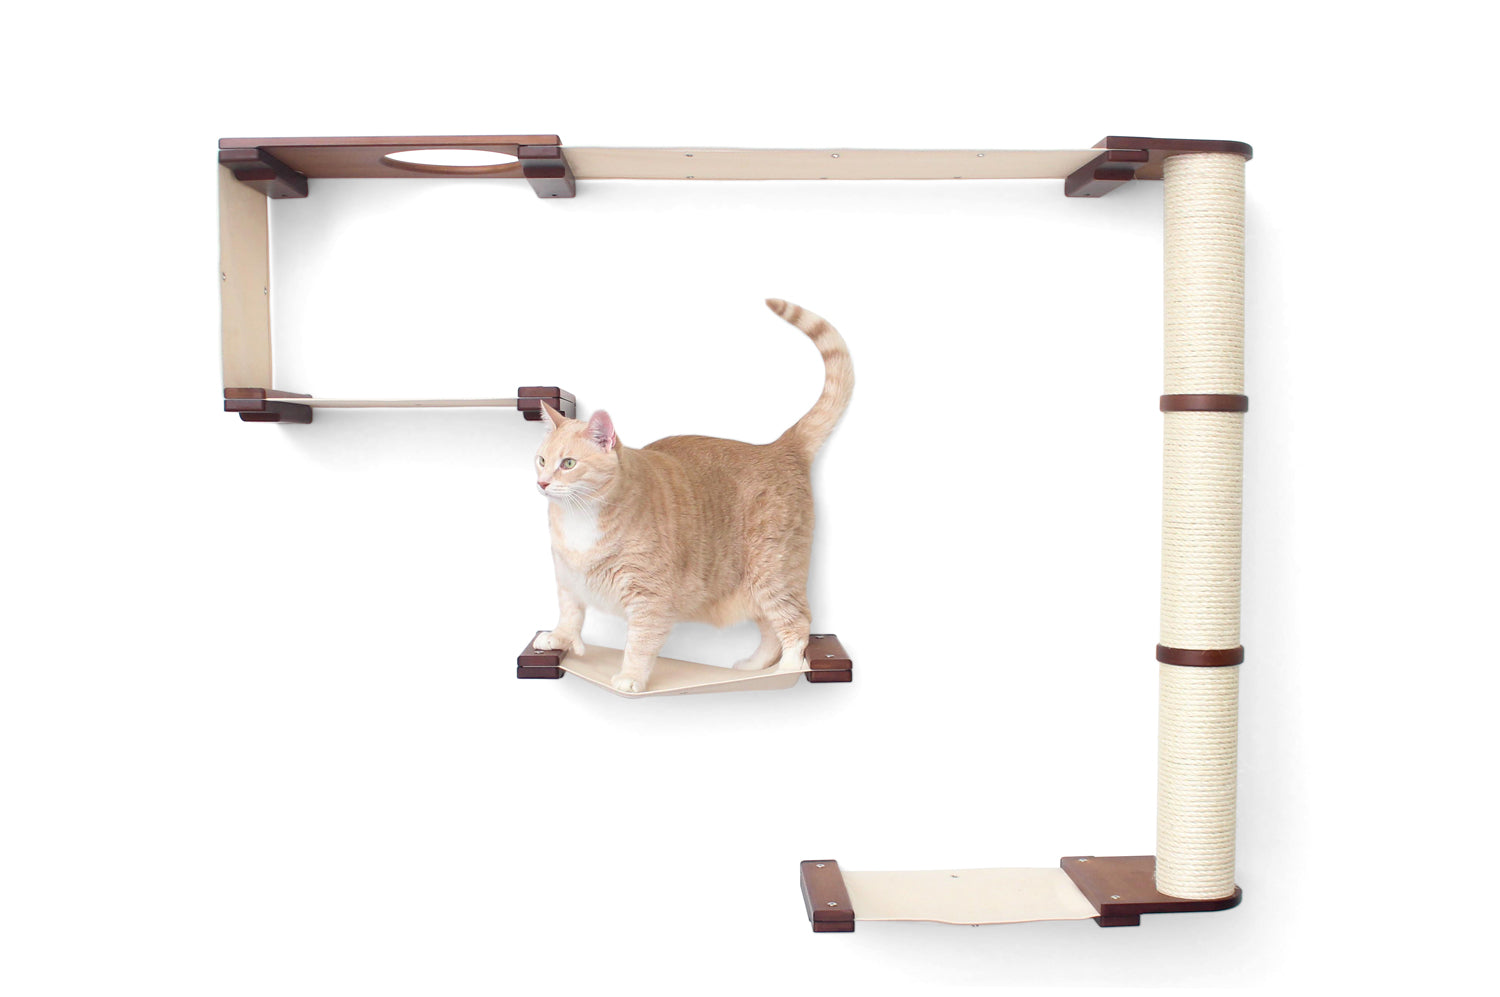 This photo displays our cat on the Climb complex. The image shows the complex in English Chestnut, a dark brown stain, with Natural fabric, a light tan color.